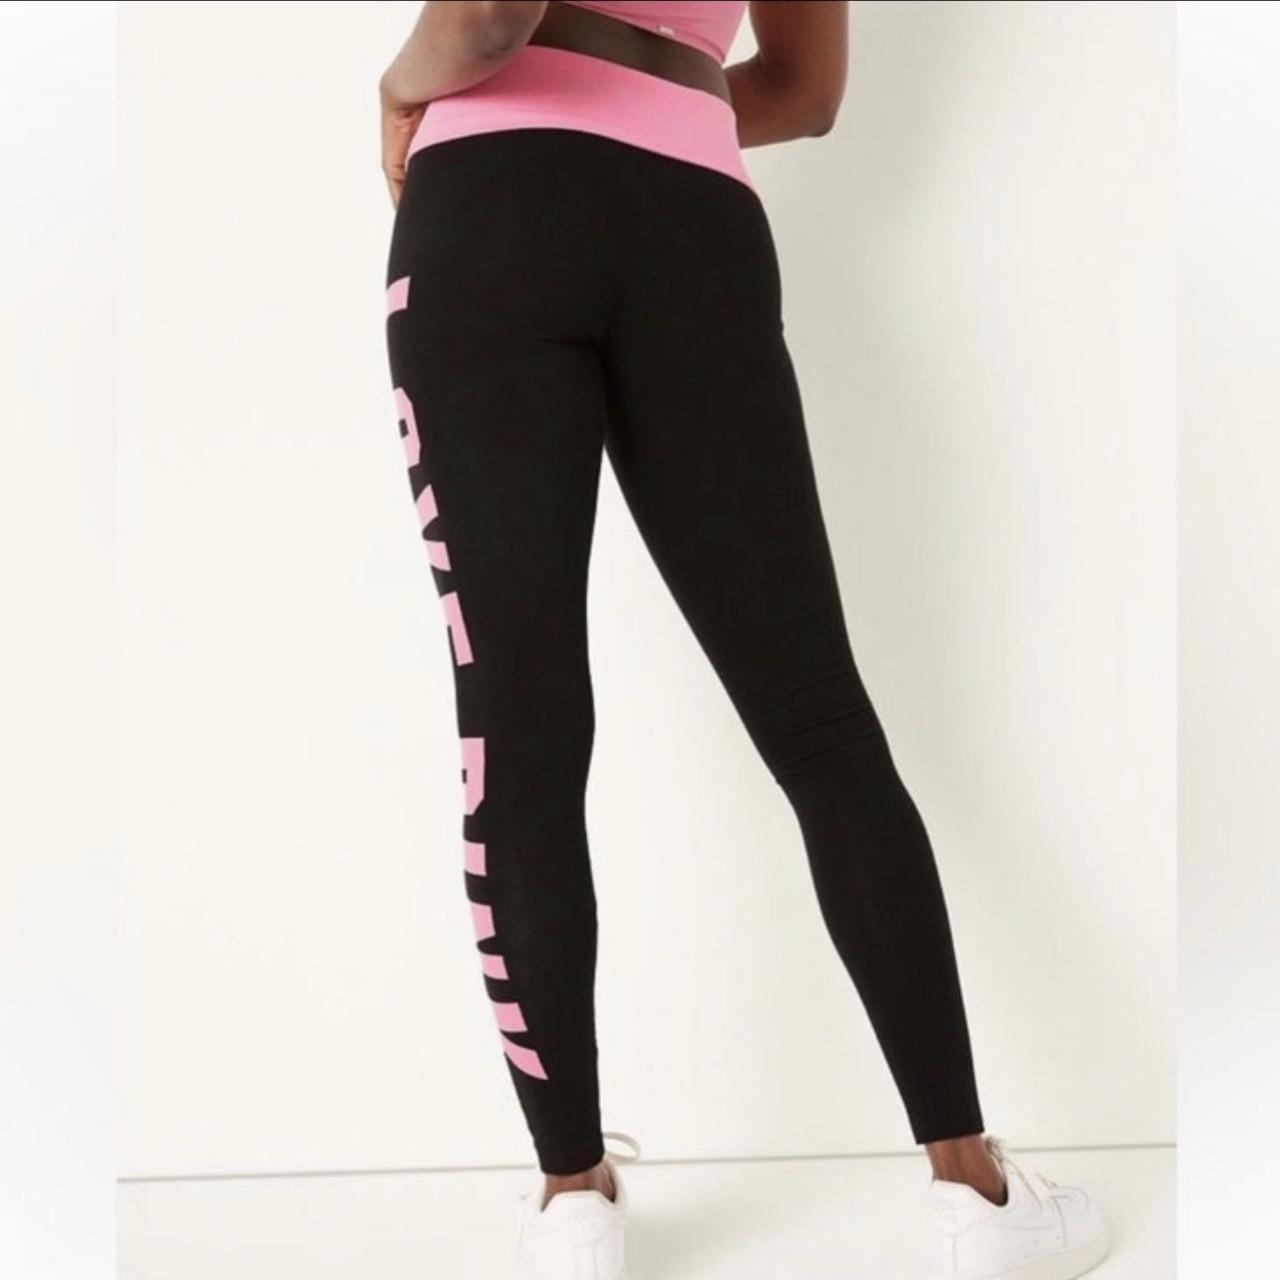 Buy Victoria's Secret PINK Heather Charcoal Cotton Foldover Flare Leggings  from the Next UK online shop